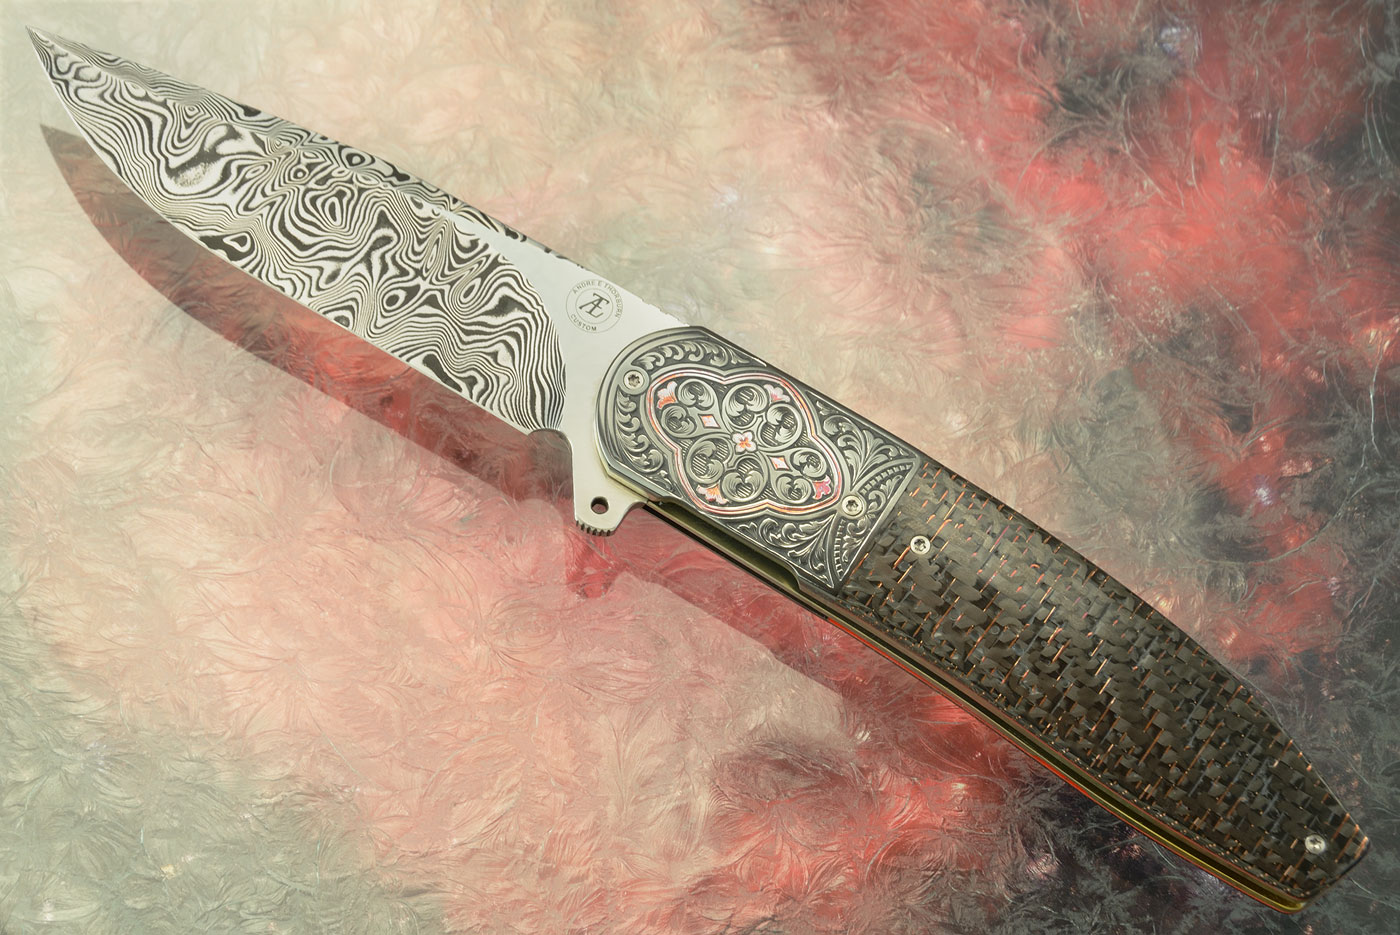 L28 Flipper with Damascus, Bronze Weave Carbon Fiber, and Engraved Zirconium with Bronze Inlay (Ceramic IKBS)